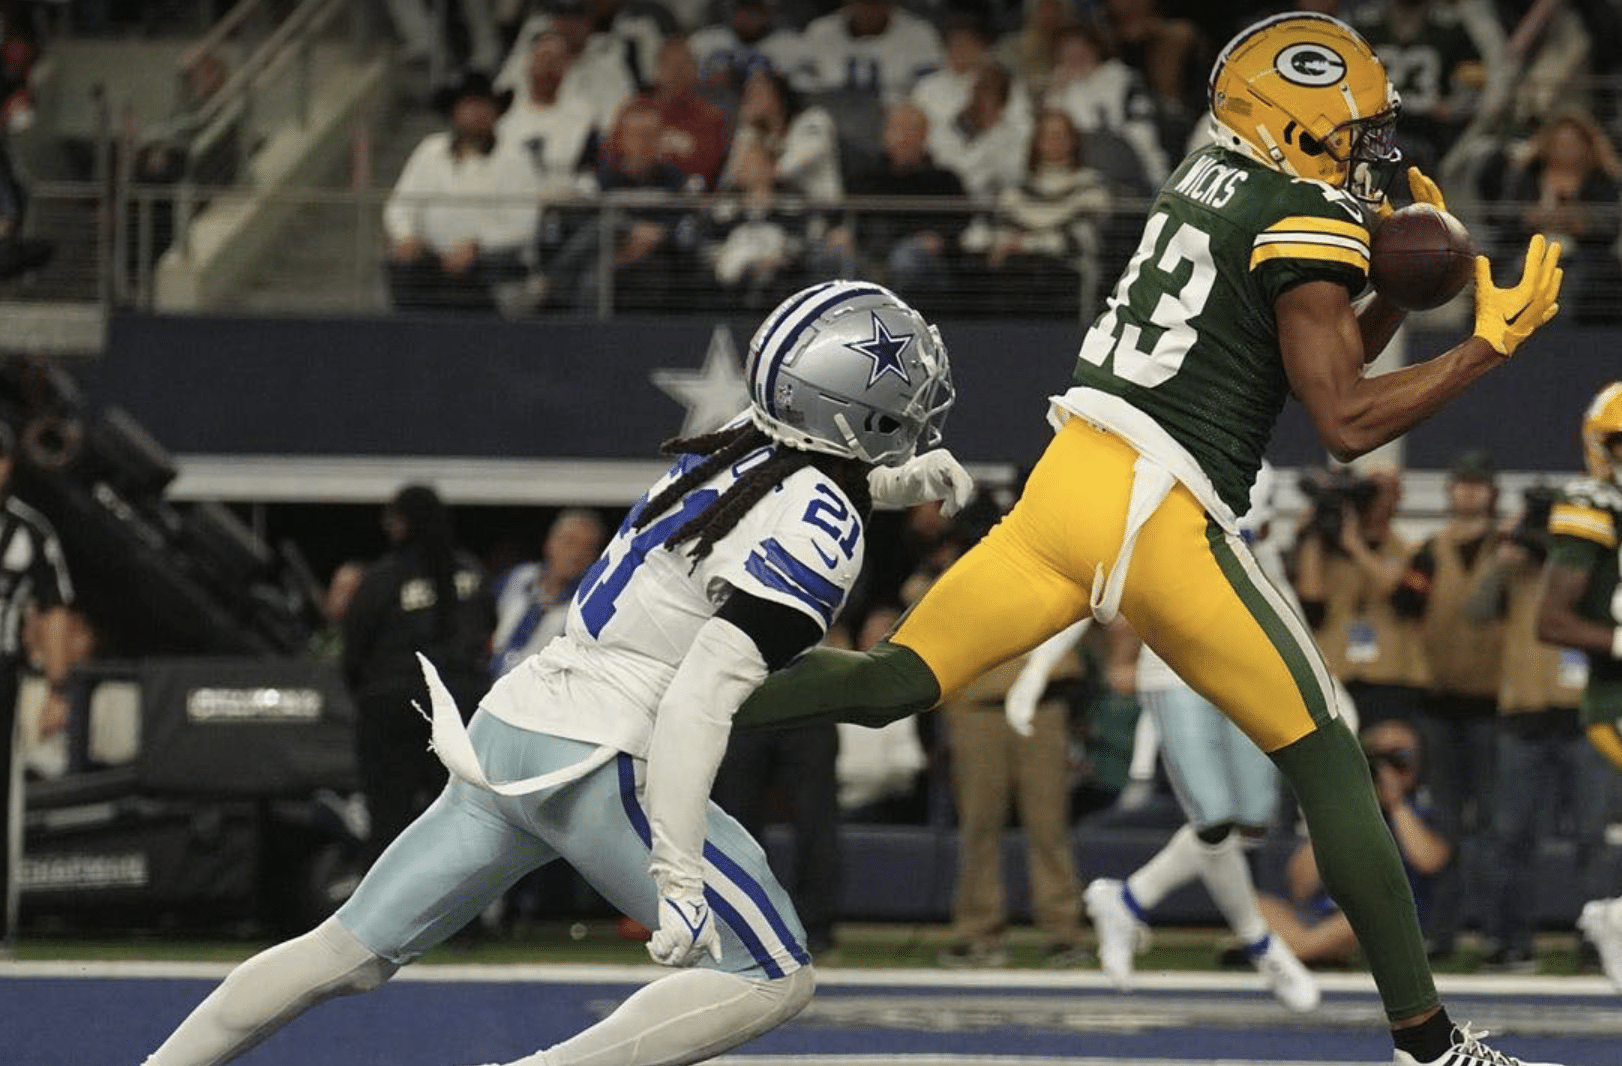 Packers destroying the Cowboys Photo Credit: Mike Hoffman, USA Today Sports